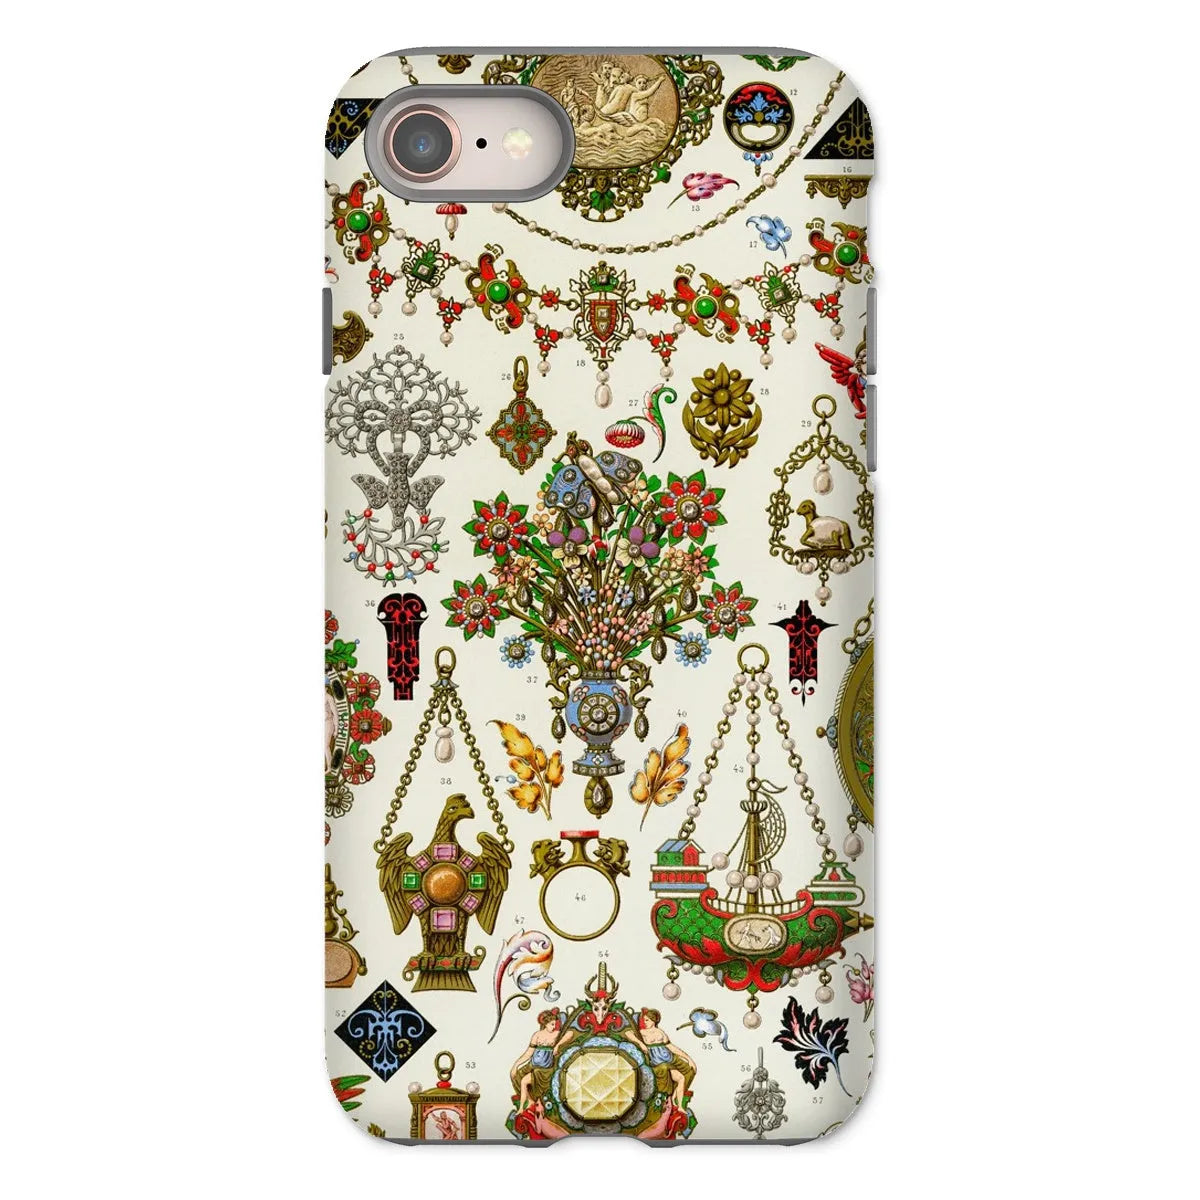 French Jewelry By Auguste Racinet Tough Phone Case - Iphone 8 / Matte - Mobile Phone Cases - Aesthetic Art